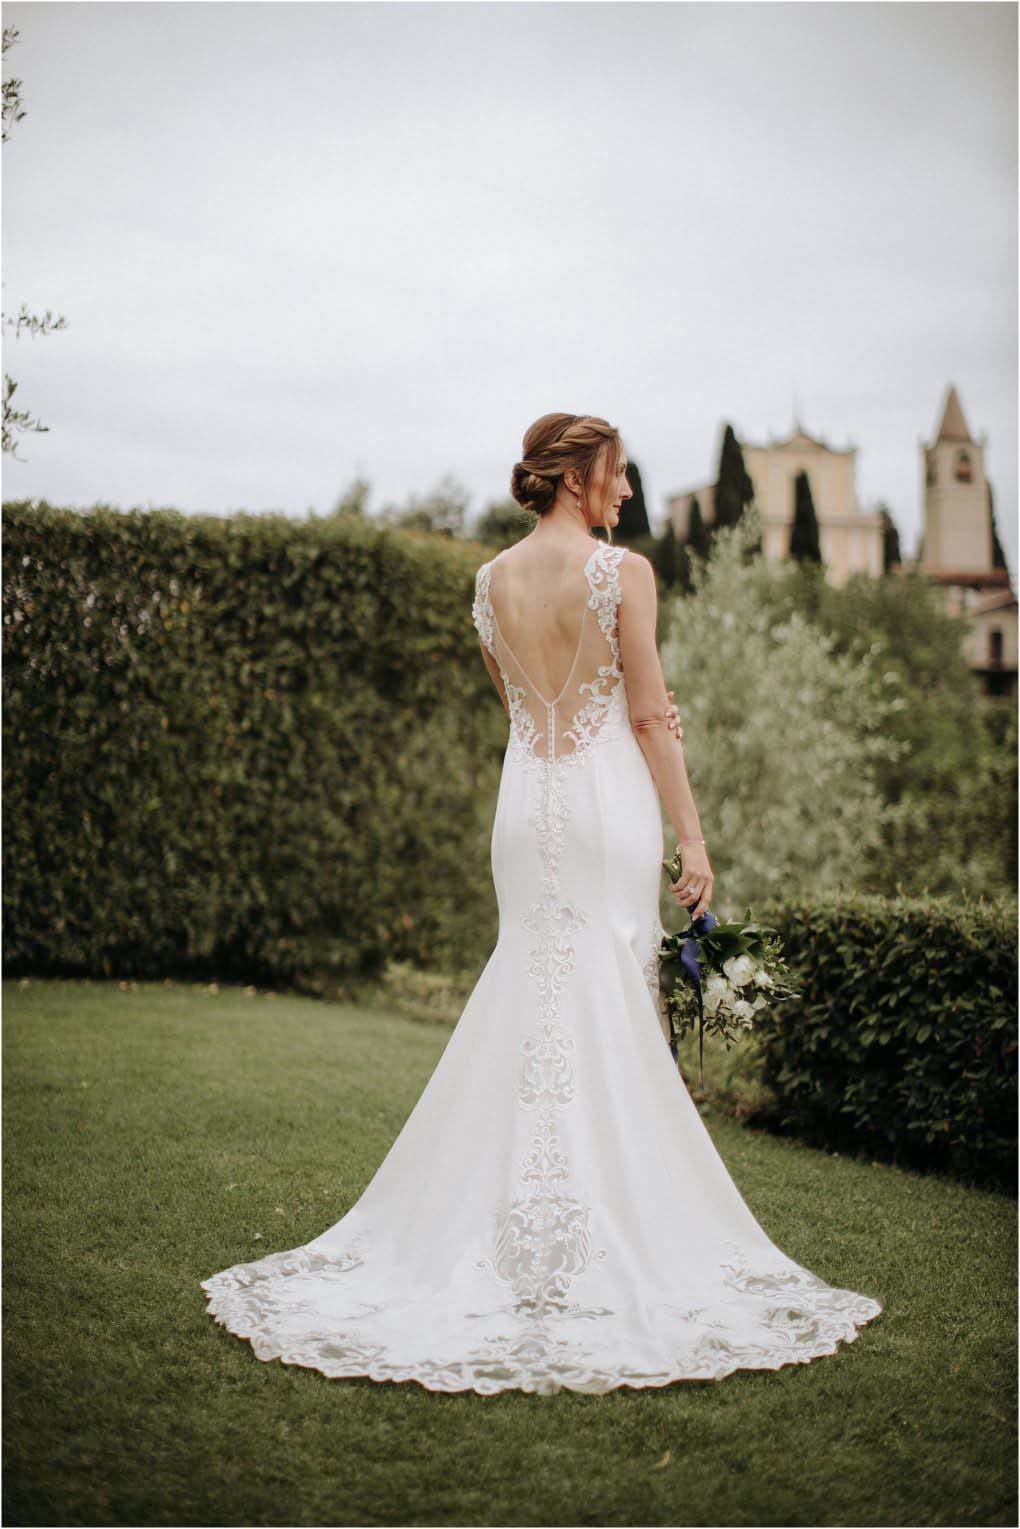 Bride in her lace gown overlooks a castle while holding her bouquet.